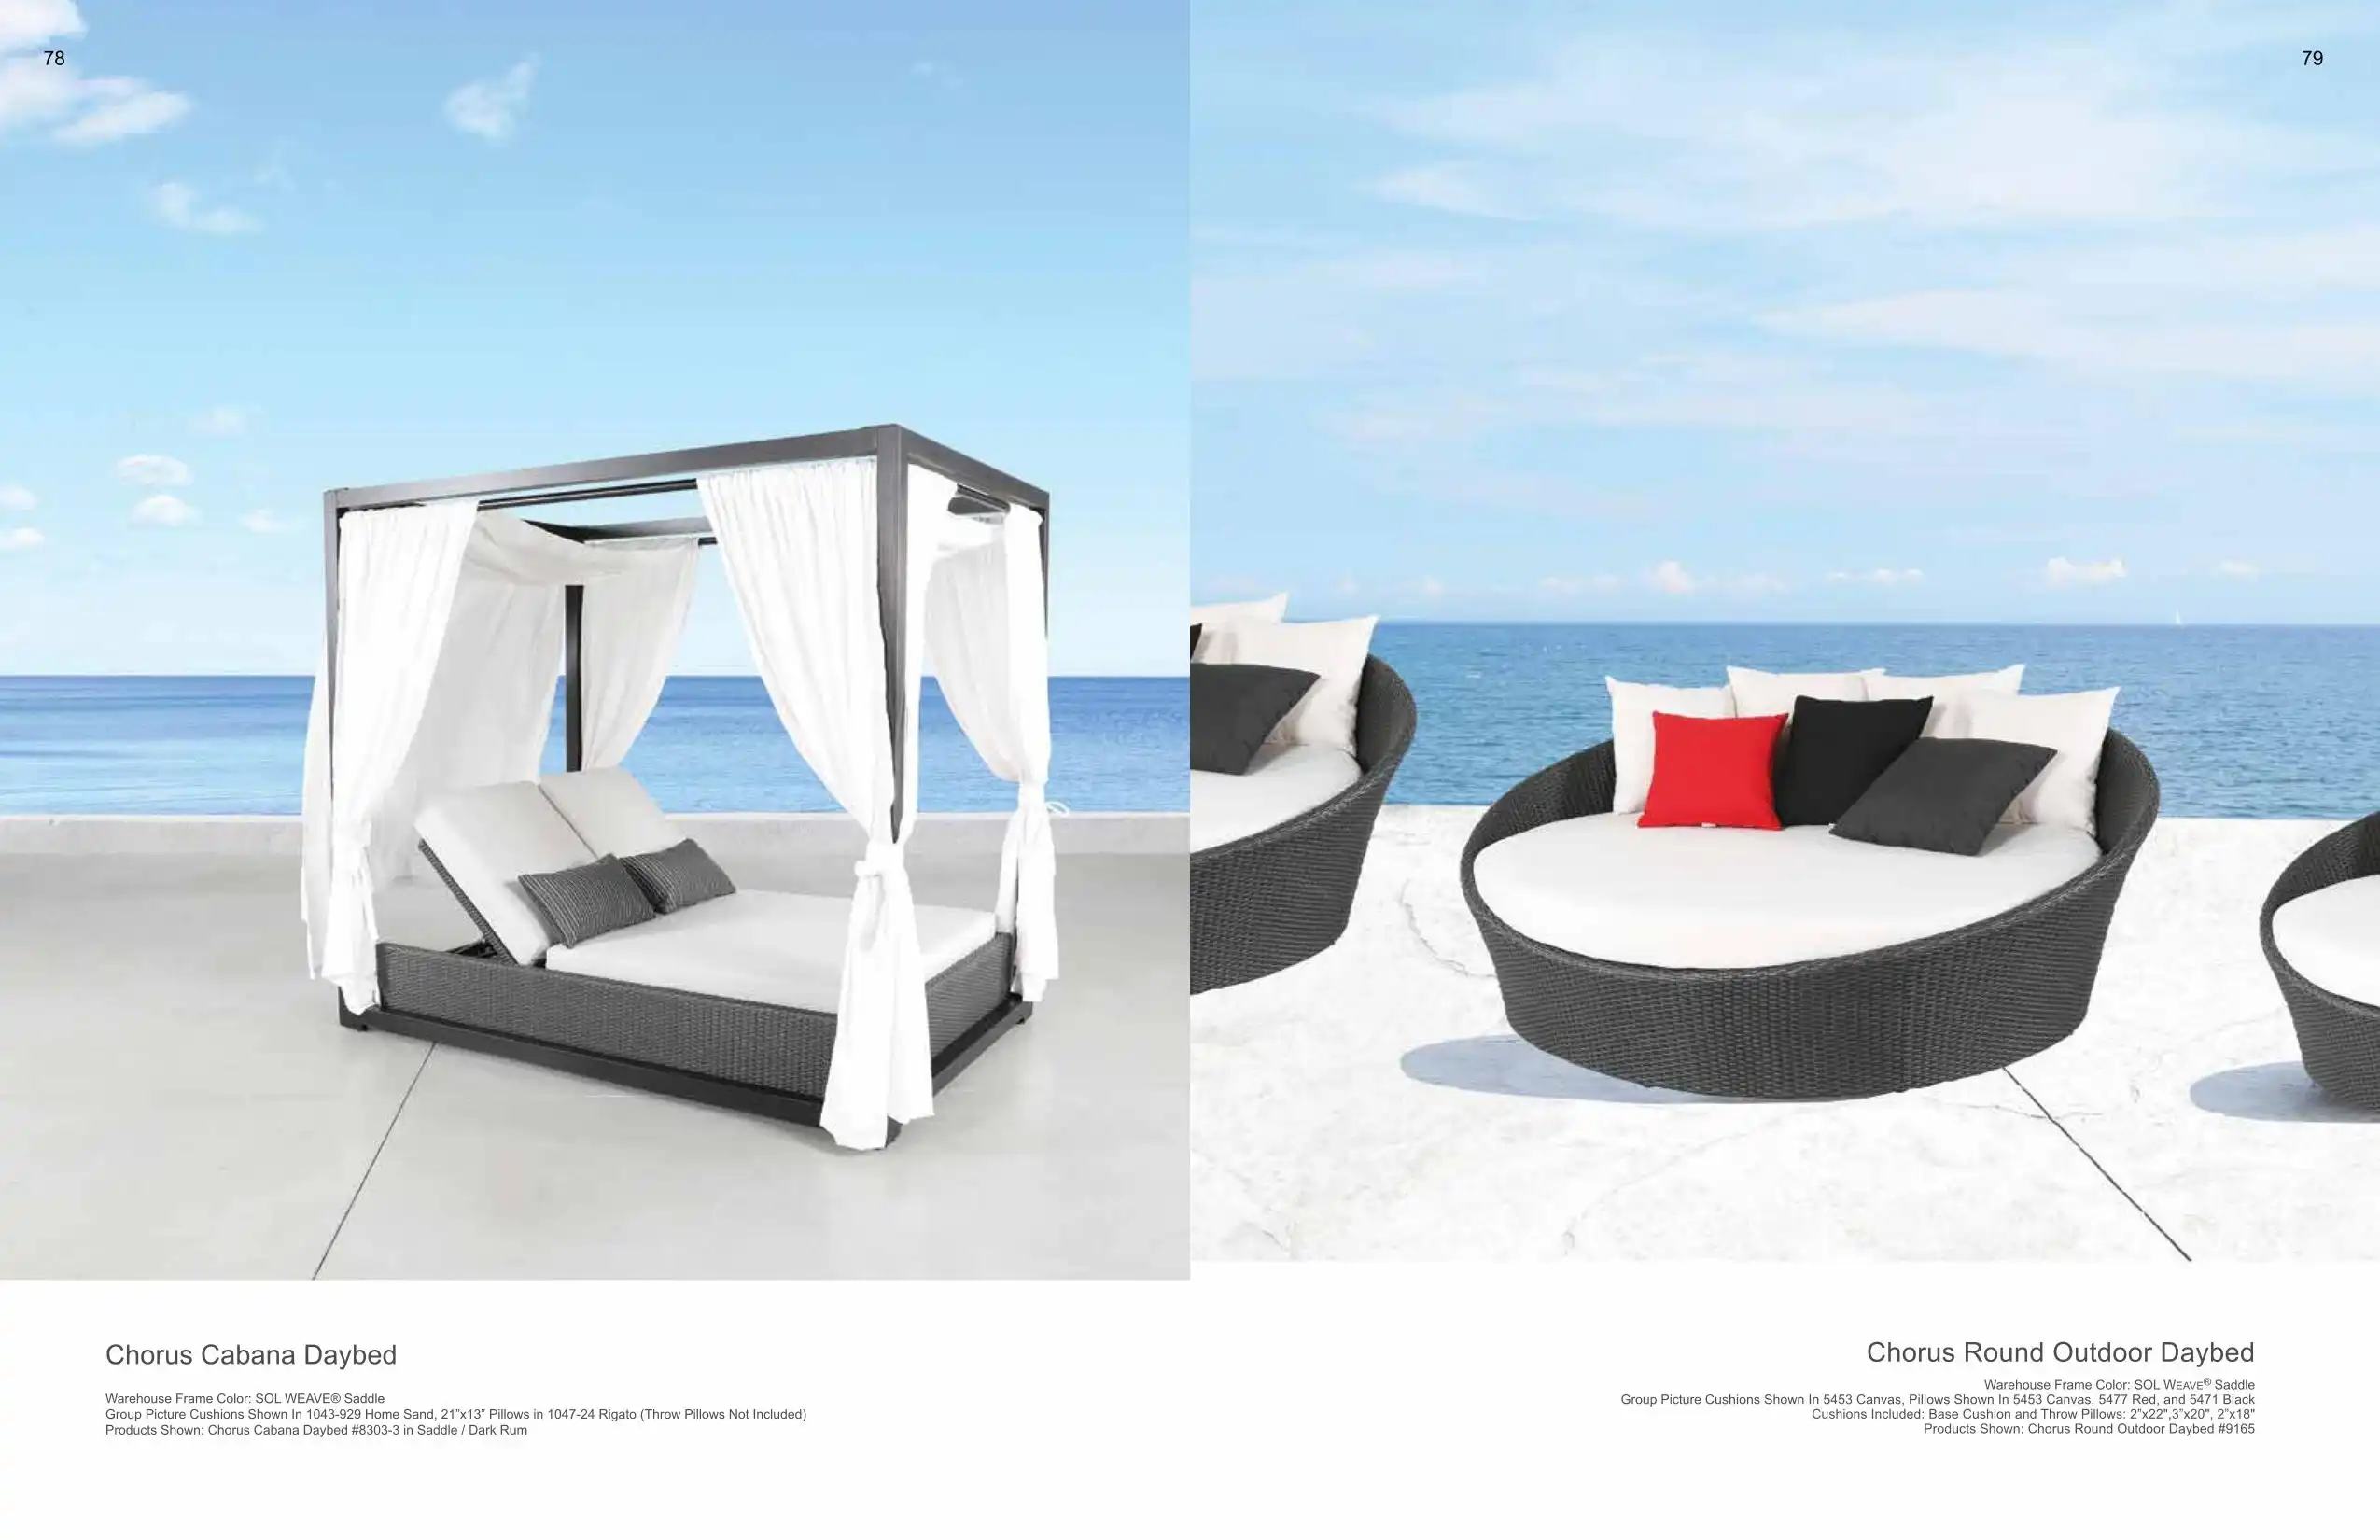 CHORUS Cabana (WICKER) & Round Outdoor Daybeds Collection(s) by Cabana Coast